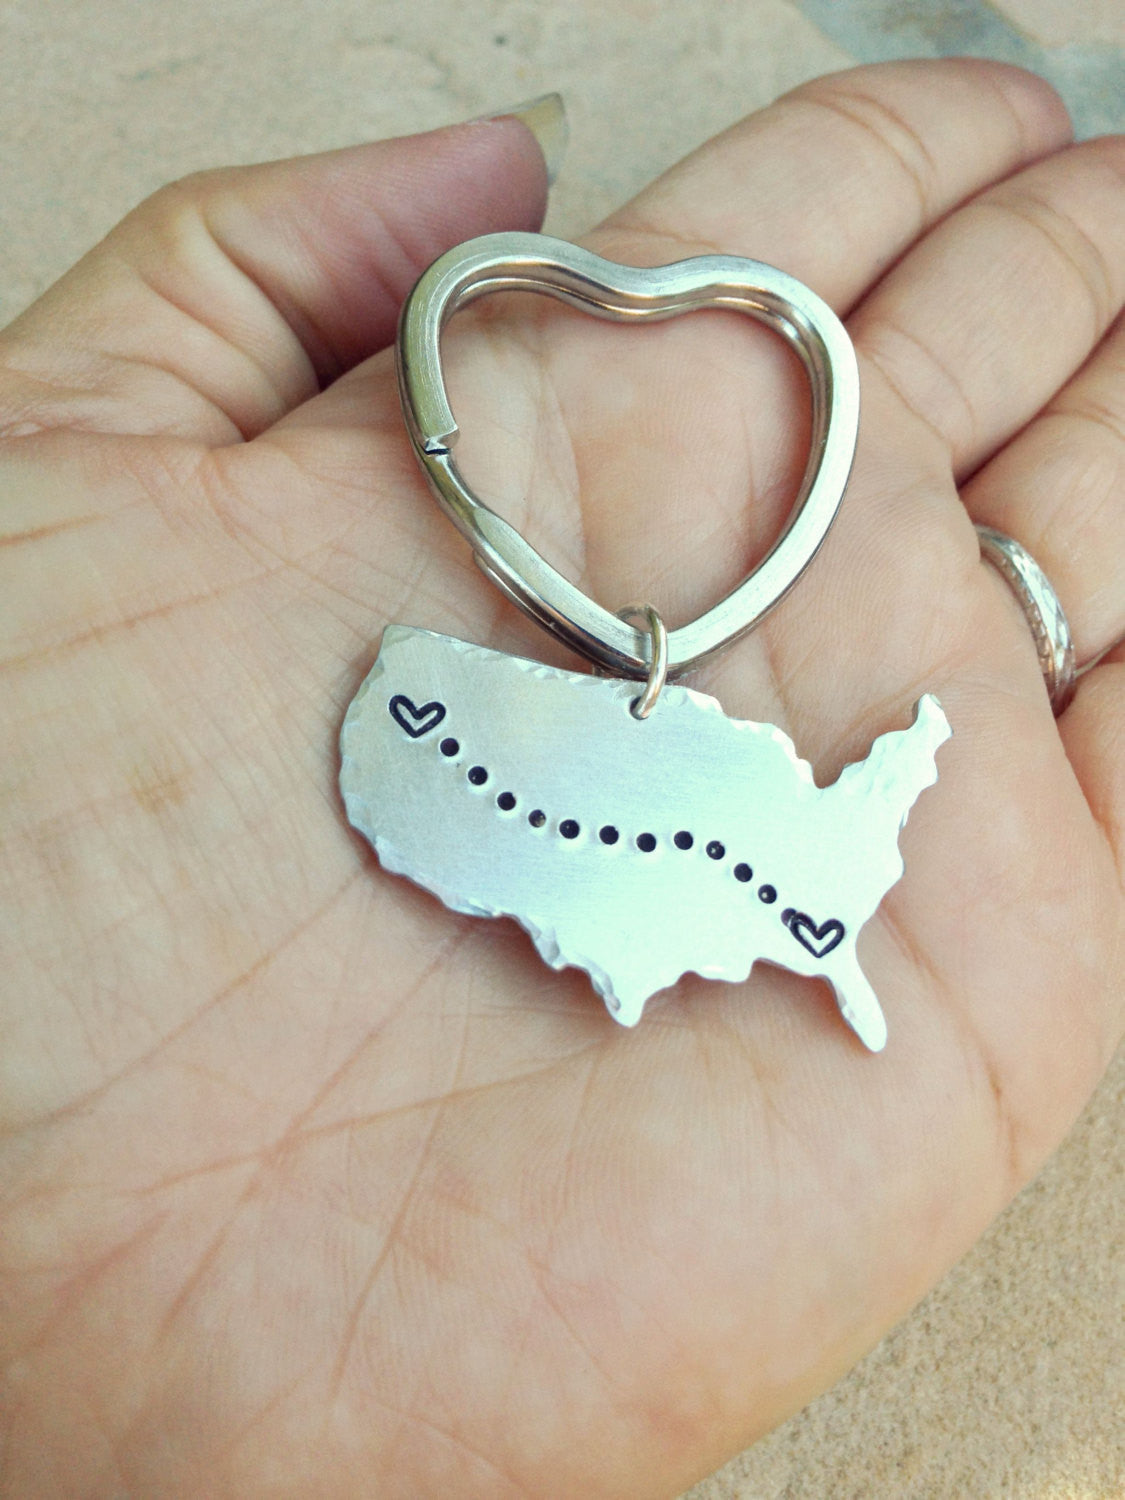 United States Keychain, Long Distance  Keychain, Couples Keychain, Best Friends Keychain, Personalized Keychain, Boyfriend Gift - Natashaaloha, jewelry, bracelets, necklace, keychains, fishing lures, gifts for men, charms, personalized, 